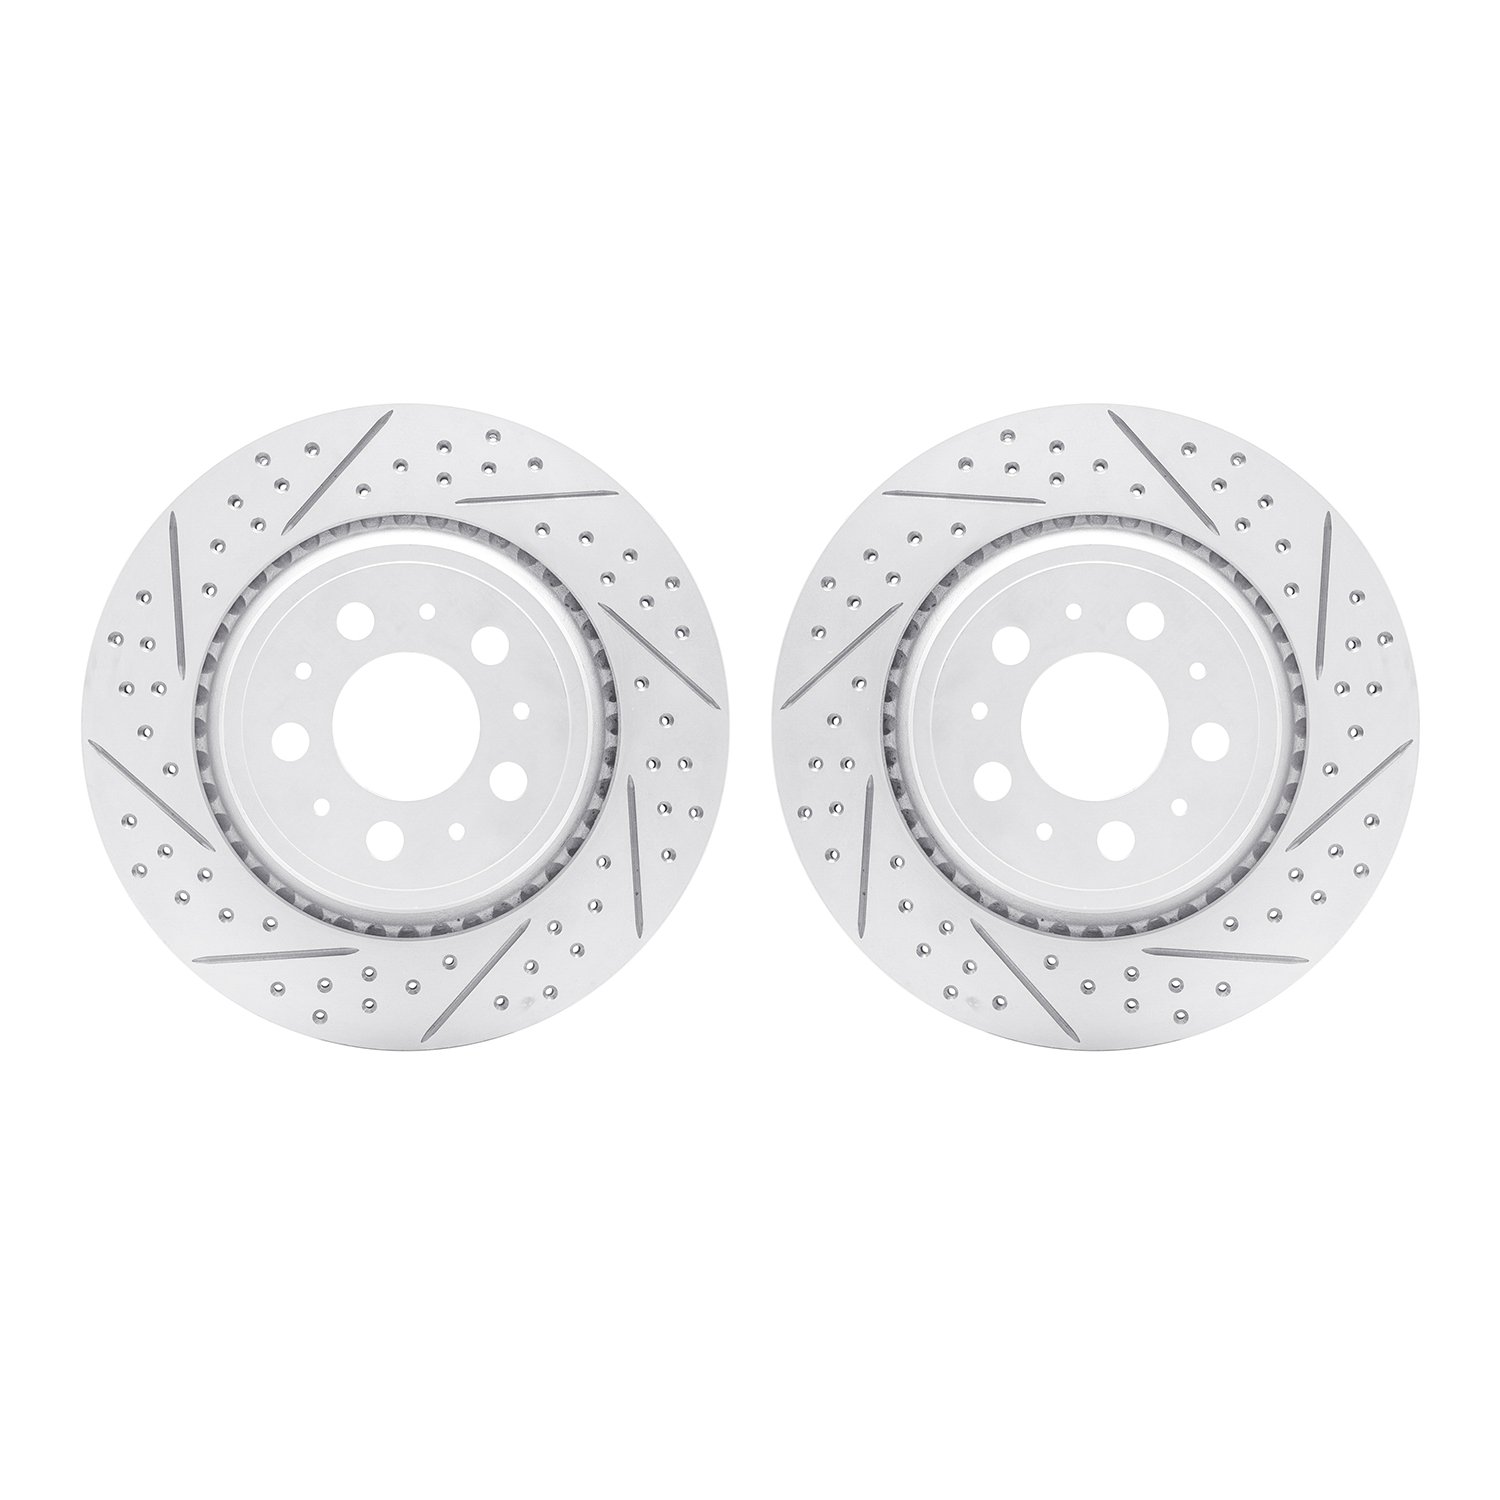 2002-27035 Geoperformance Drilled/Slotted Brake Rotors, 2003-2014 Volvo, Position: Rear